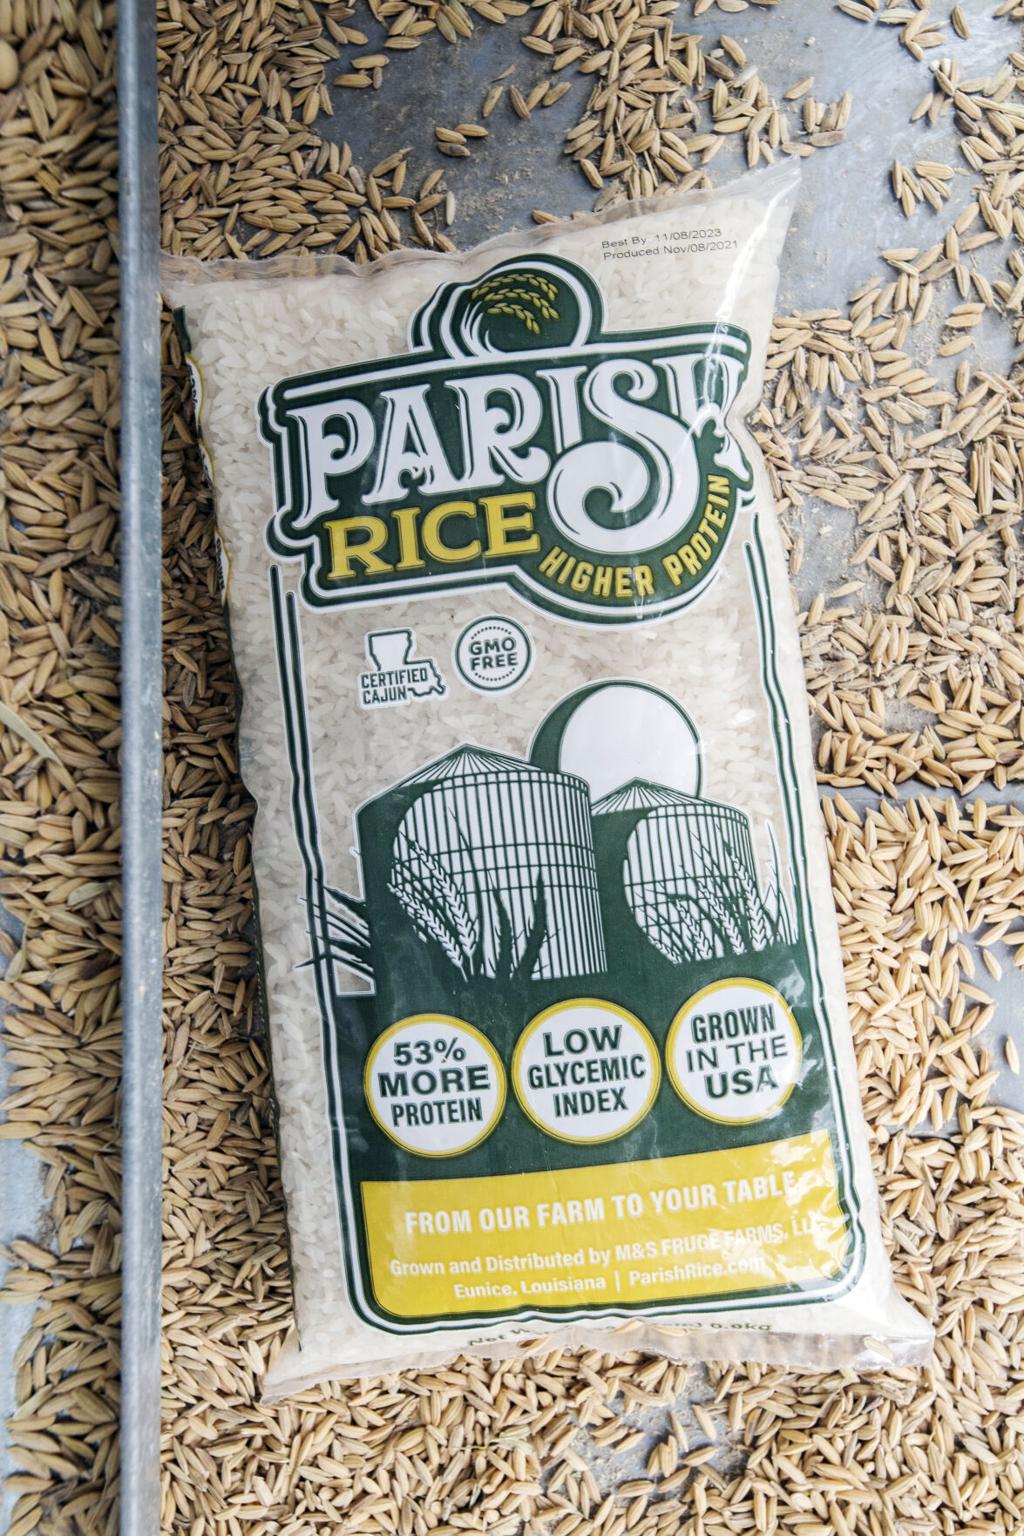 Supreme Rice Invests $16.2 Million to Create Parboil Facilities, Expand  Product Line